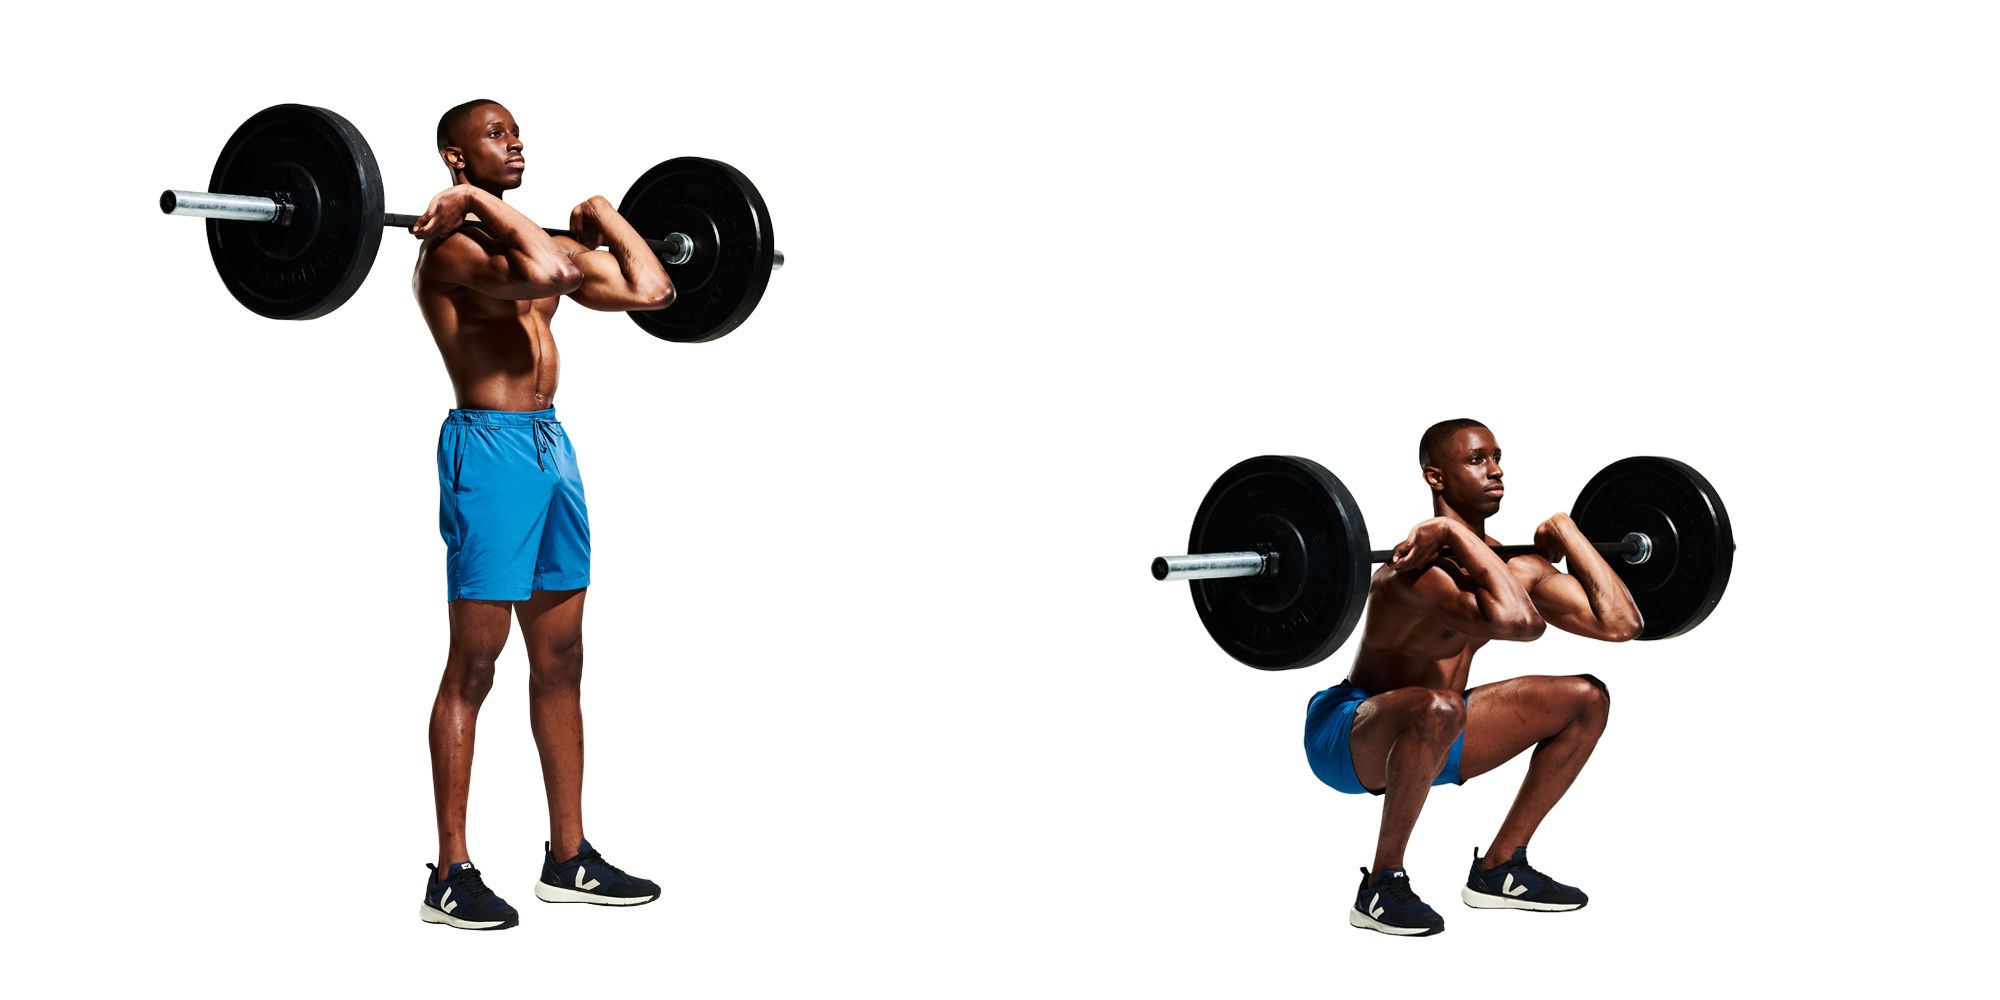 How to Do a Squat Correctly